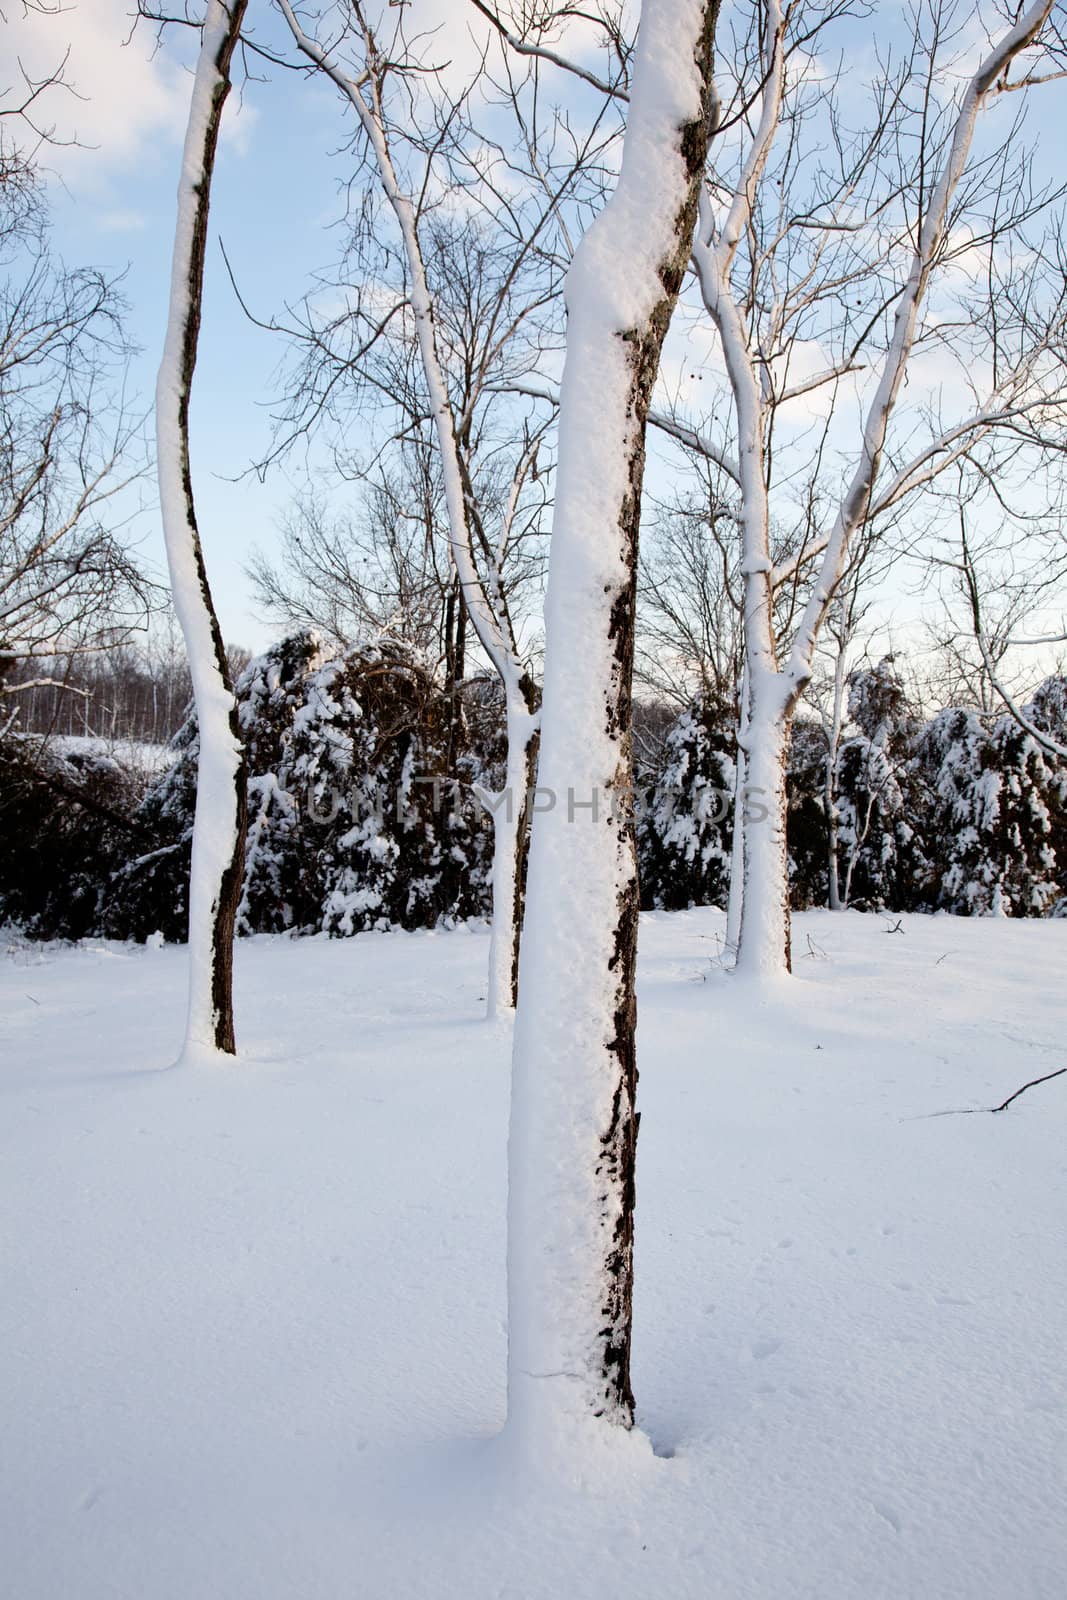 Snow sticking to sides of tree trunks after storm by steheap